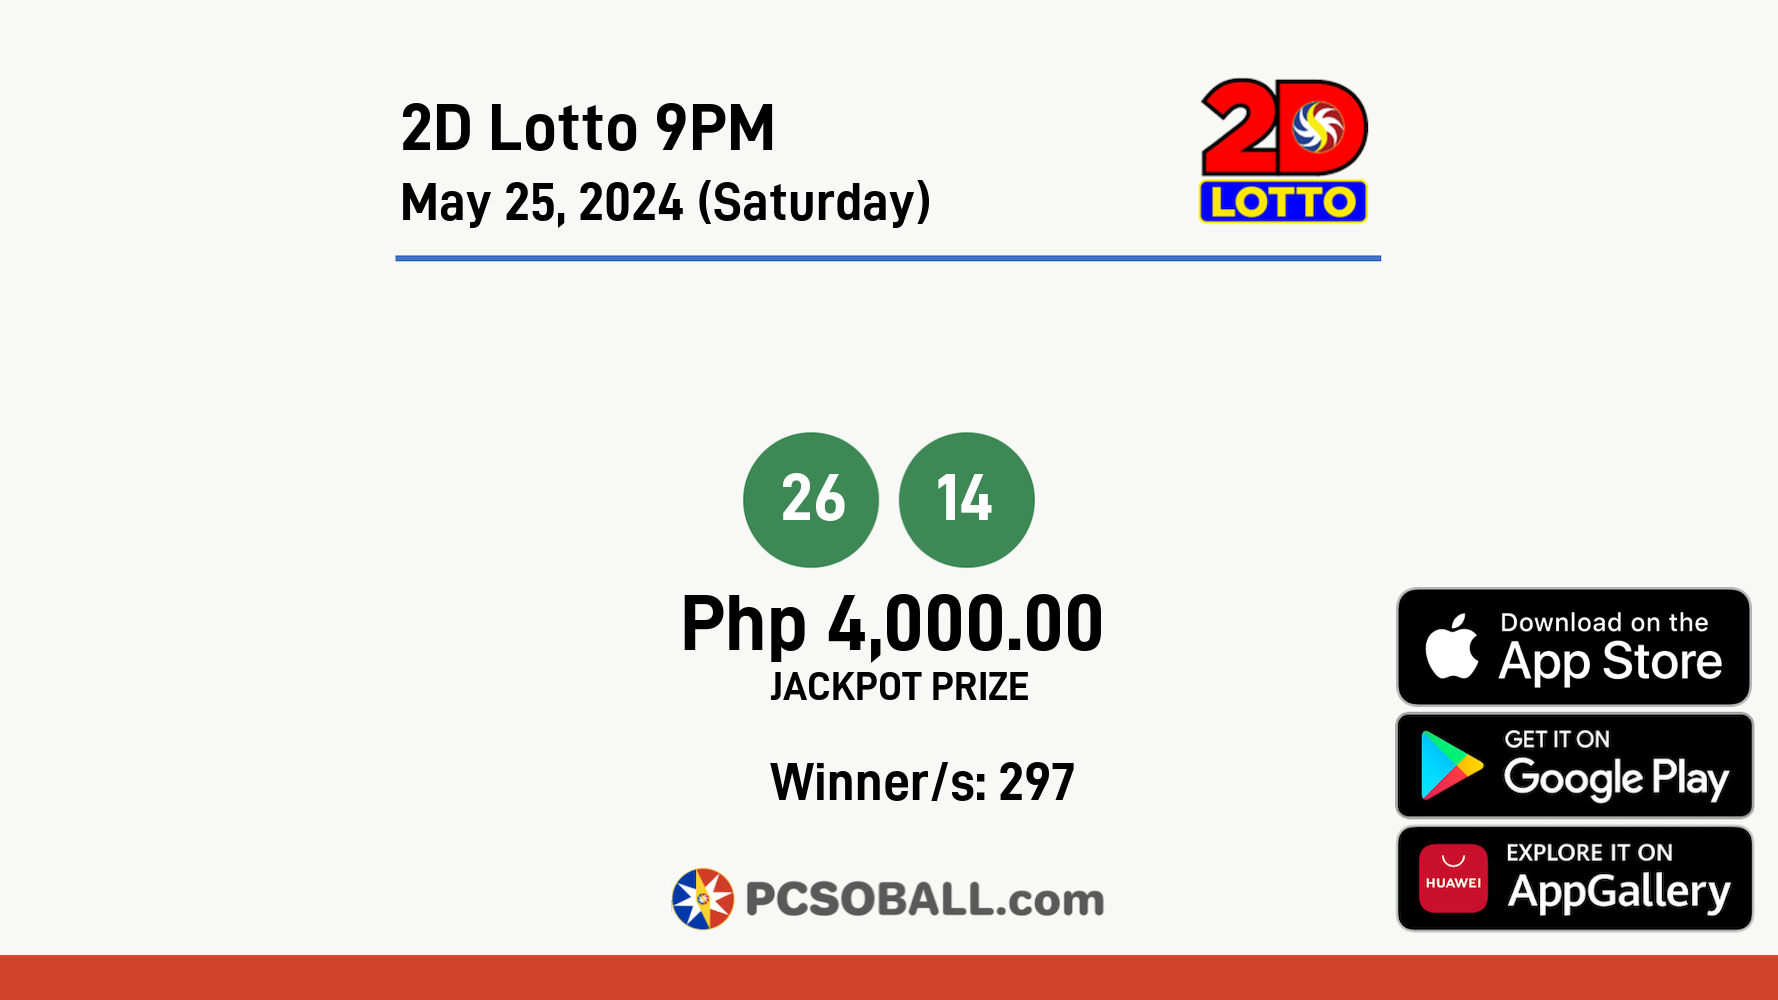 2D Lotto 9PM May 25, 2024 (Saturday) Result